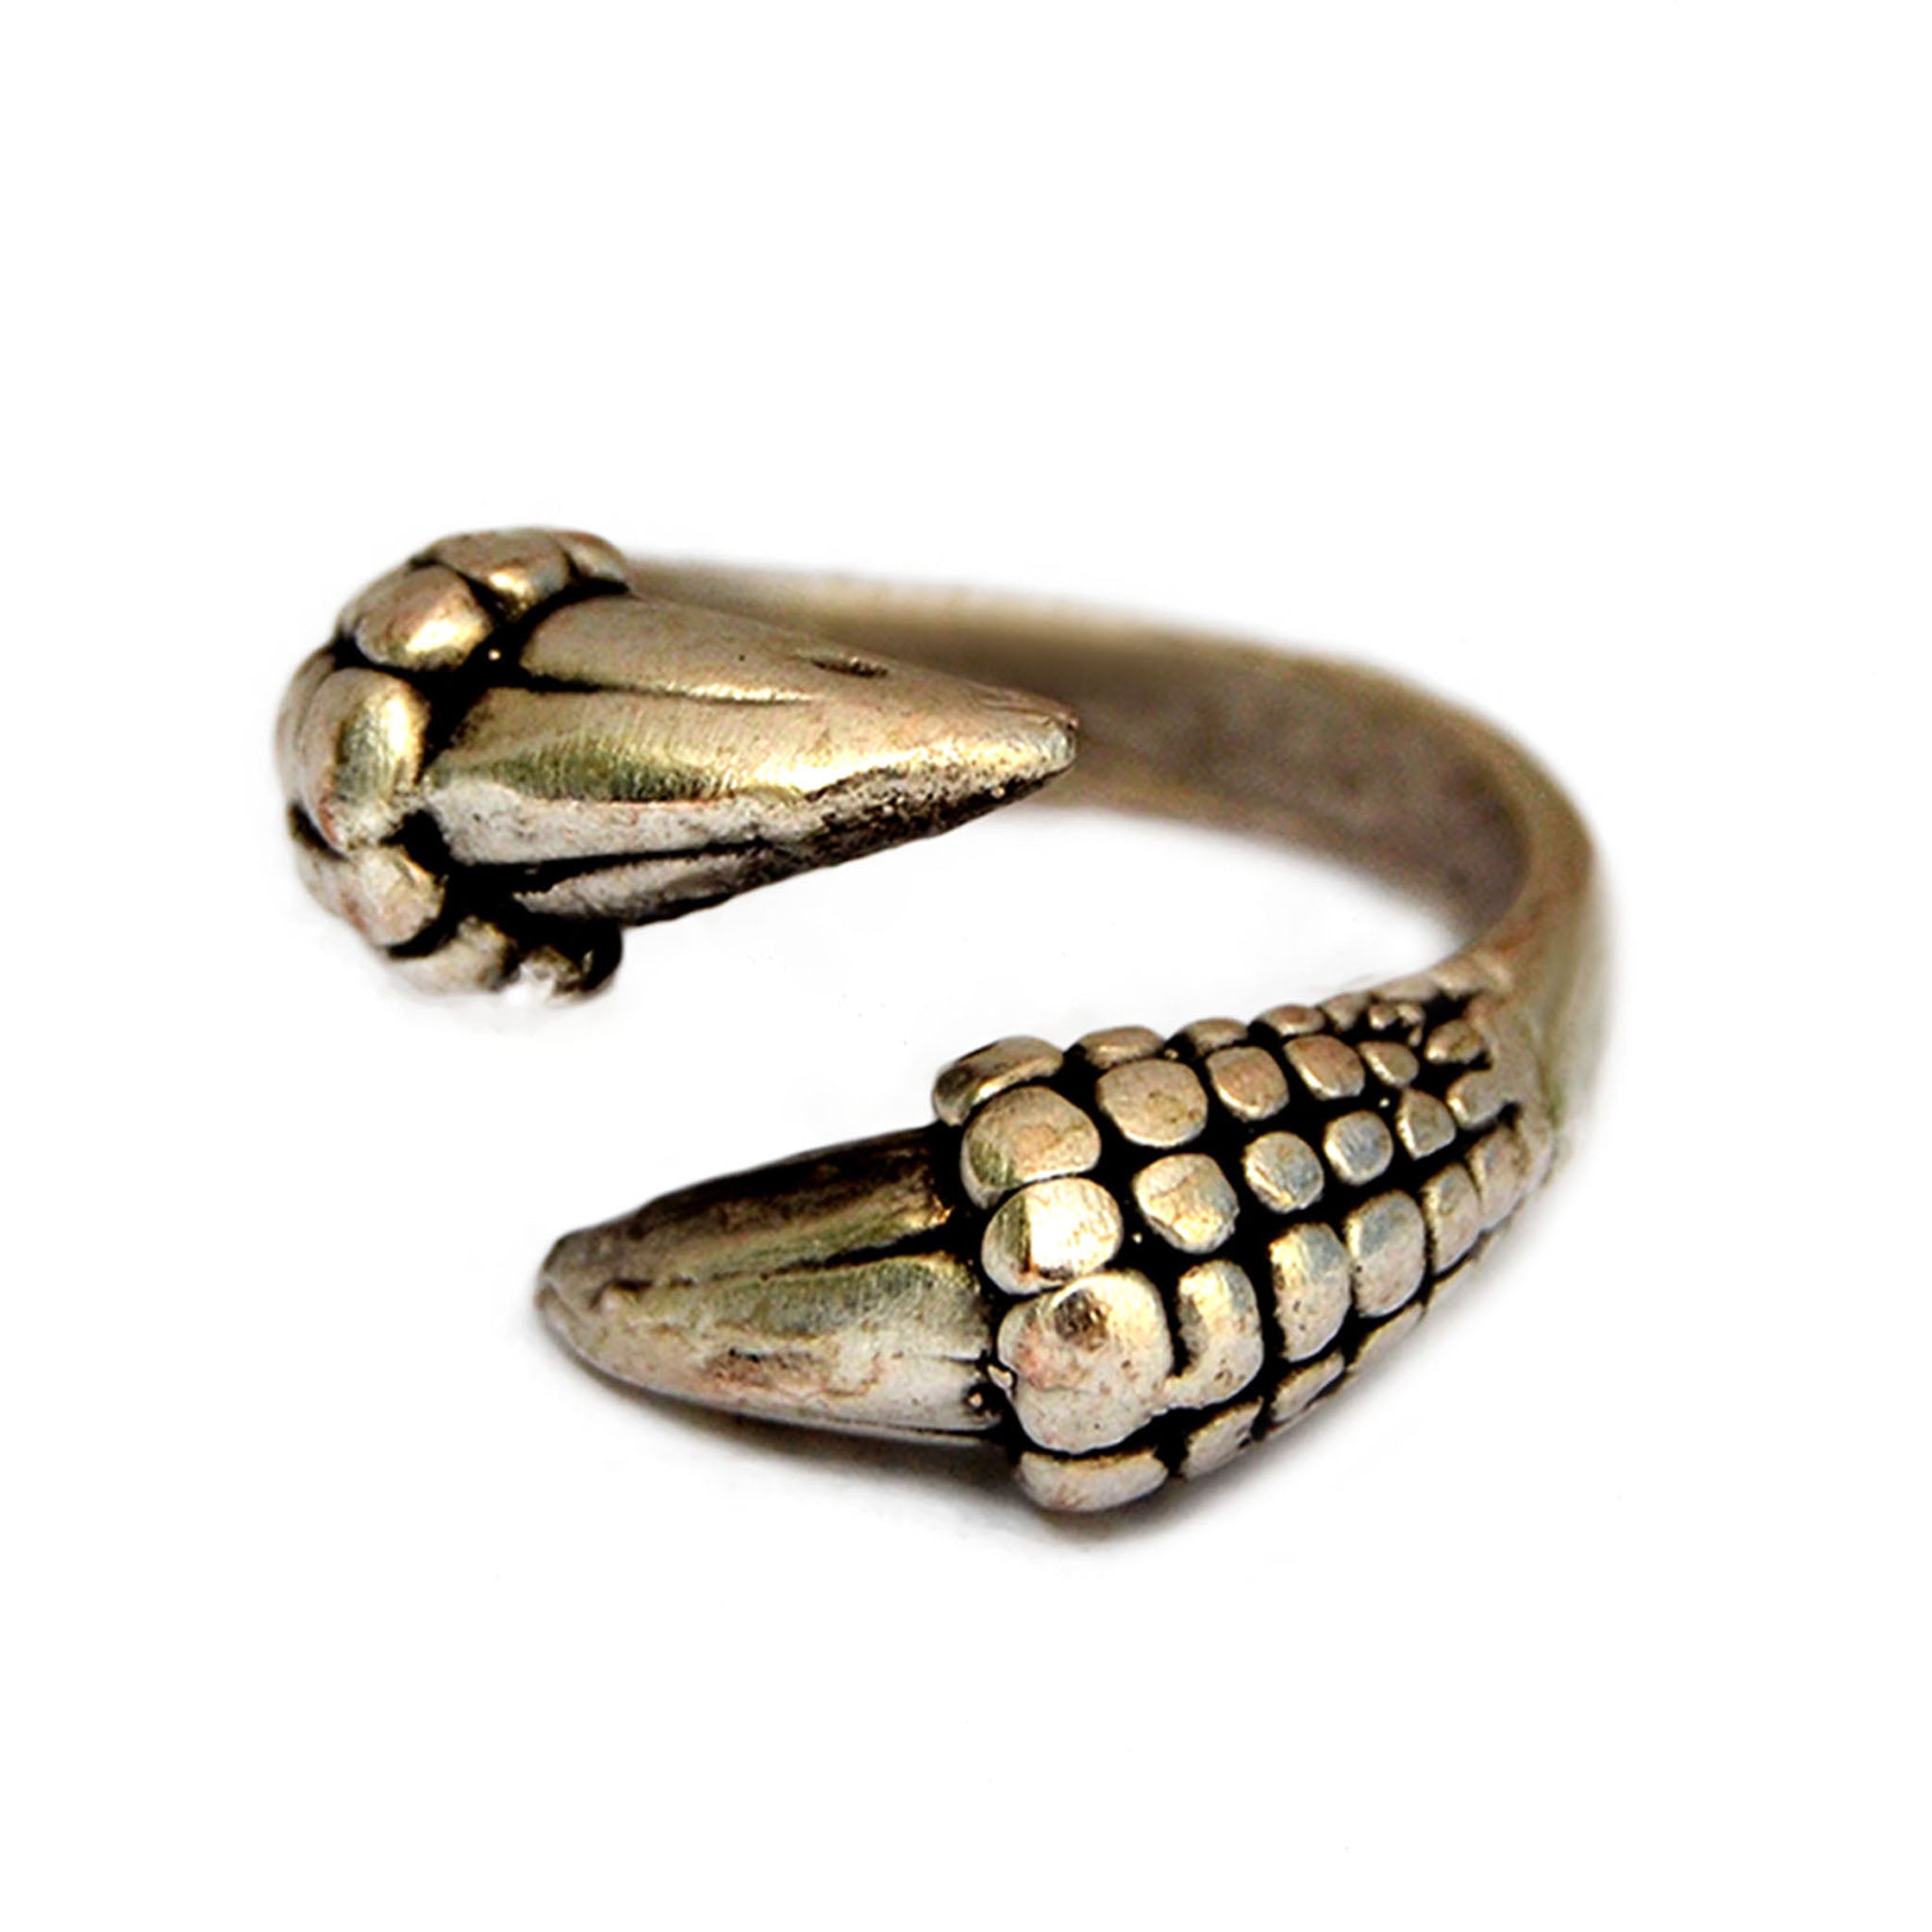 Dragon scale ring